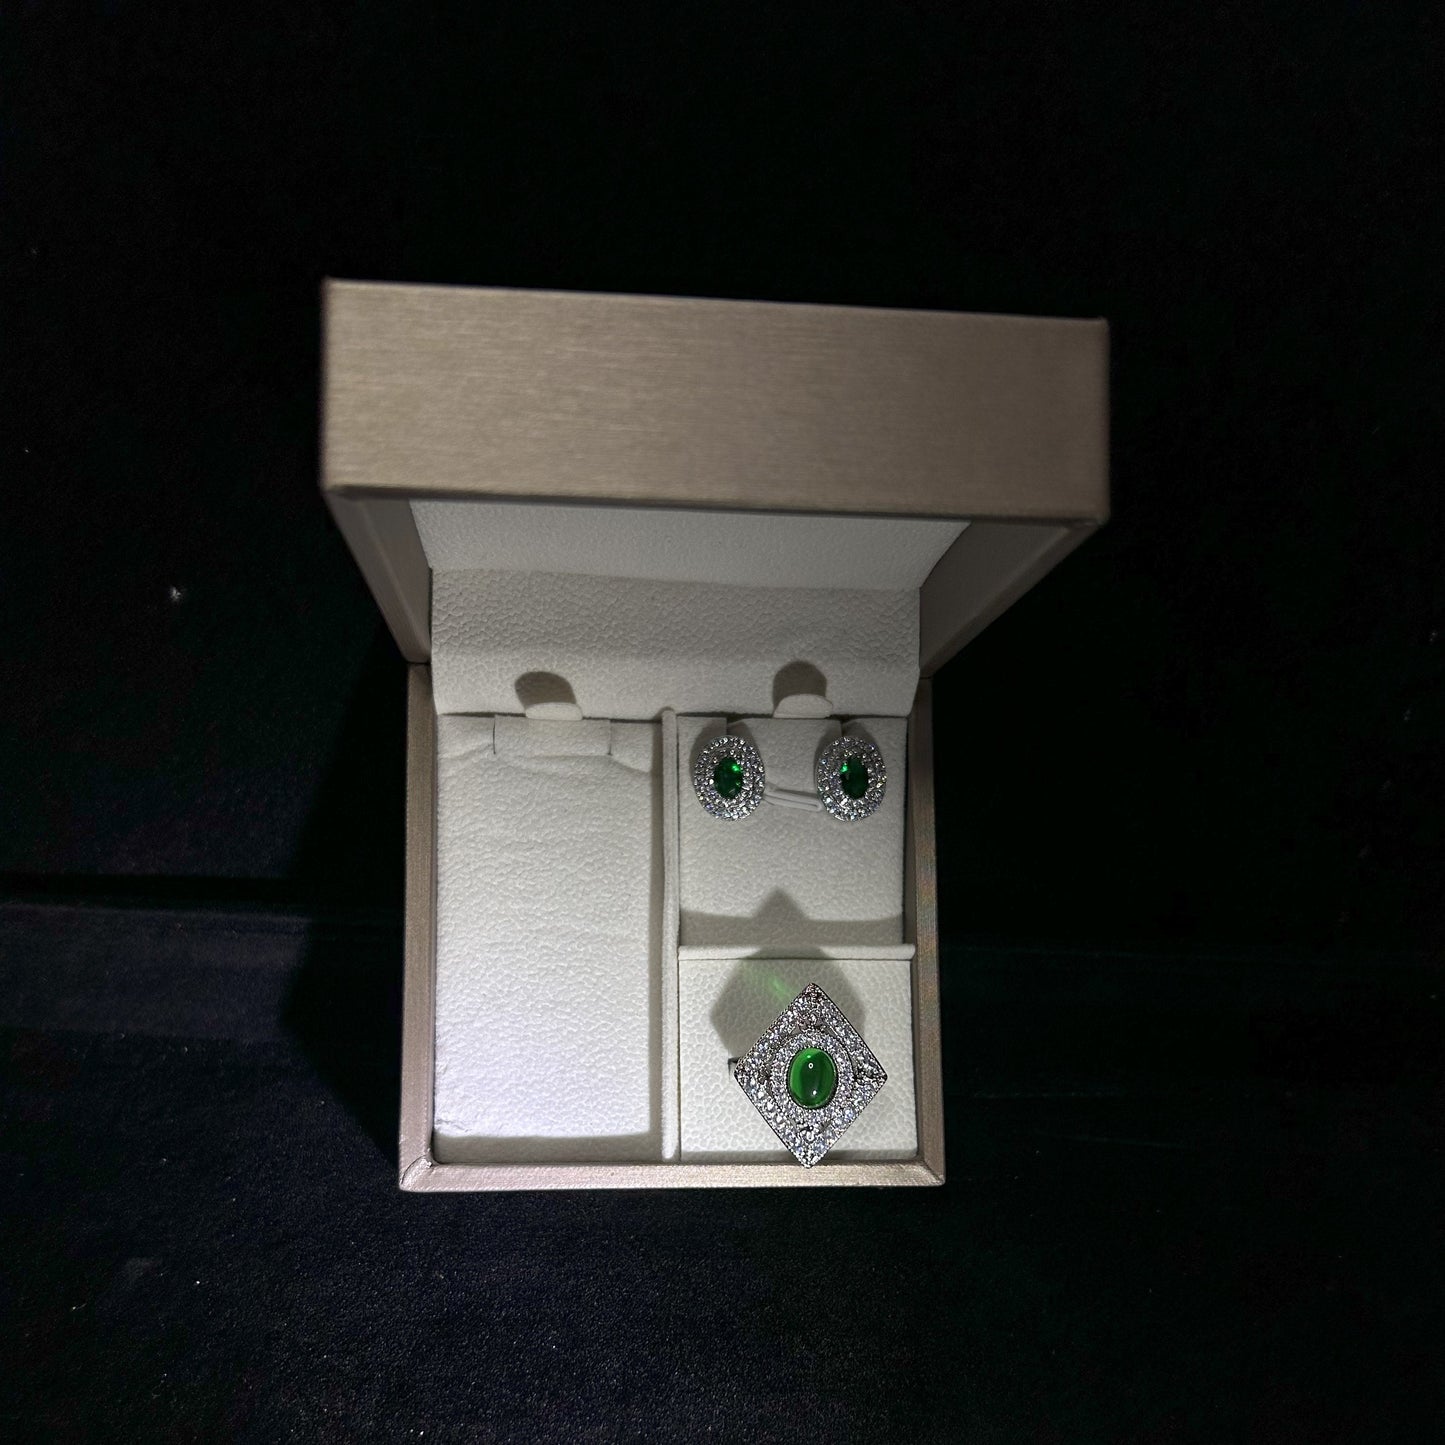 Diamond Shaped Frame Oval Emerald Green Cubic Zirconia Silver Plated Set